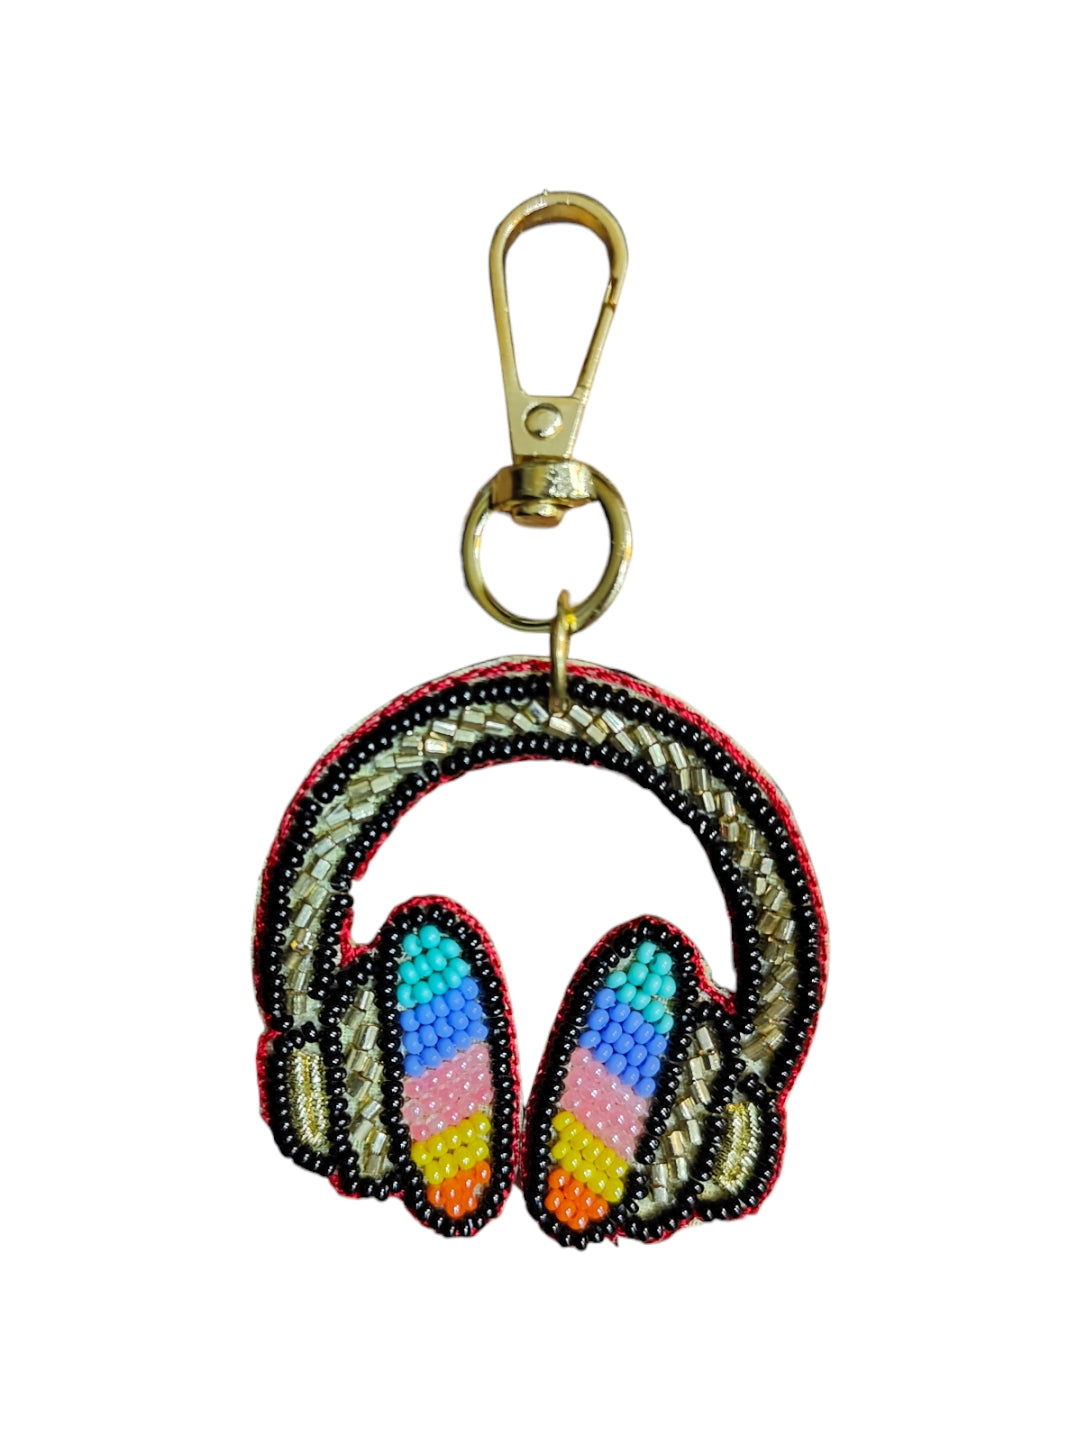 Whether you're a music enthusiast on the go or simply want to add a trendy accent to your everyday carry, this bag charm is sure to turn heads and spark conversations. 